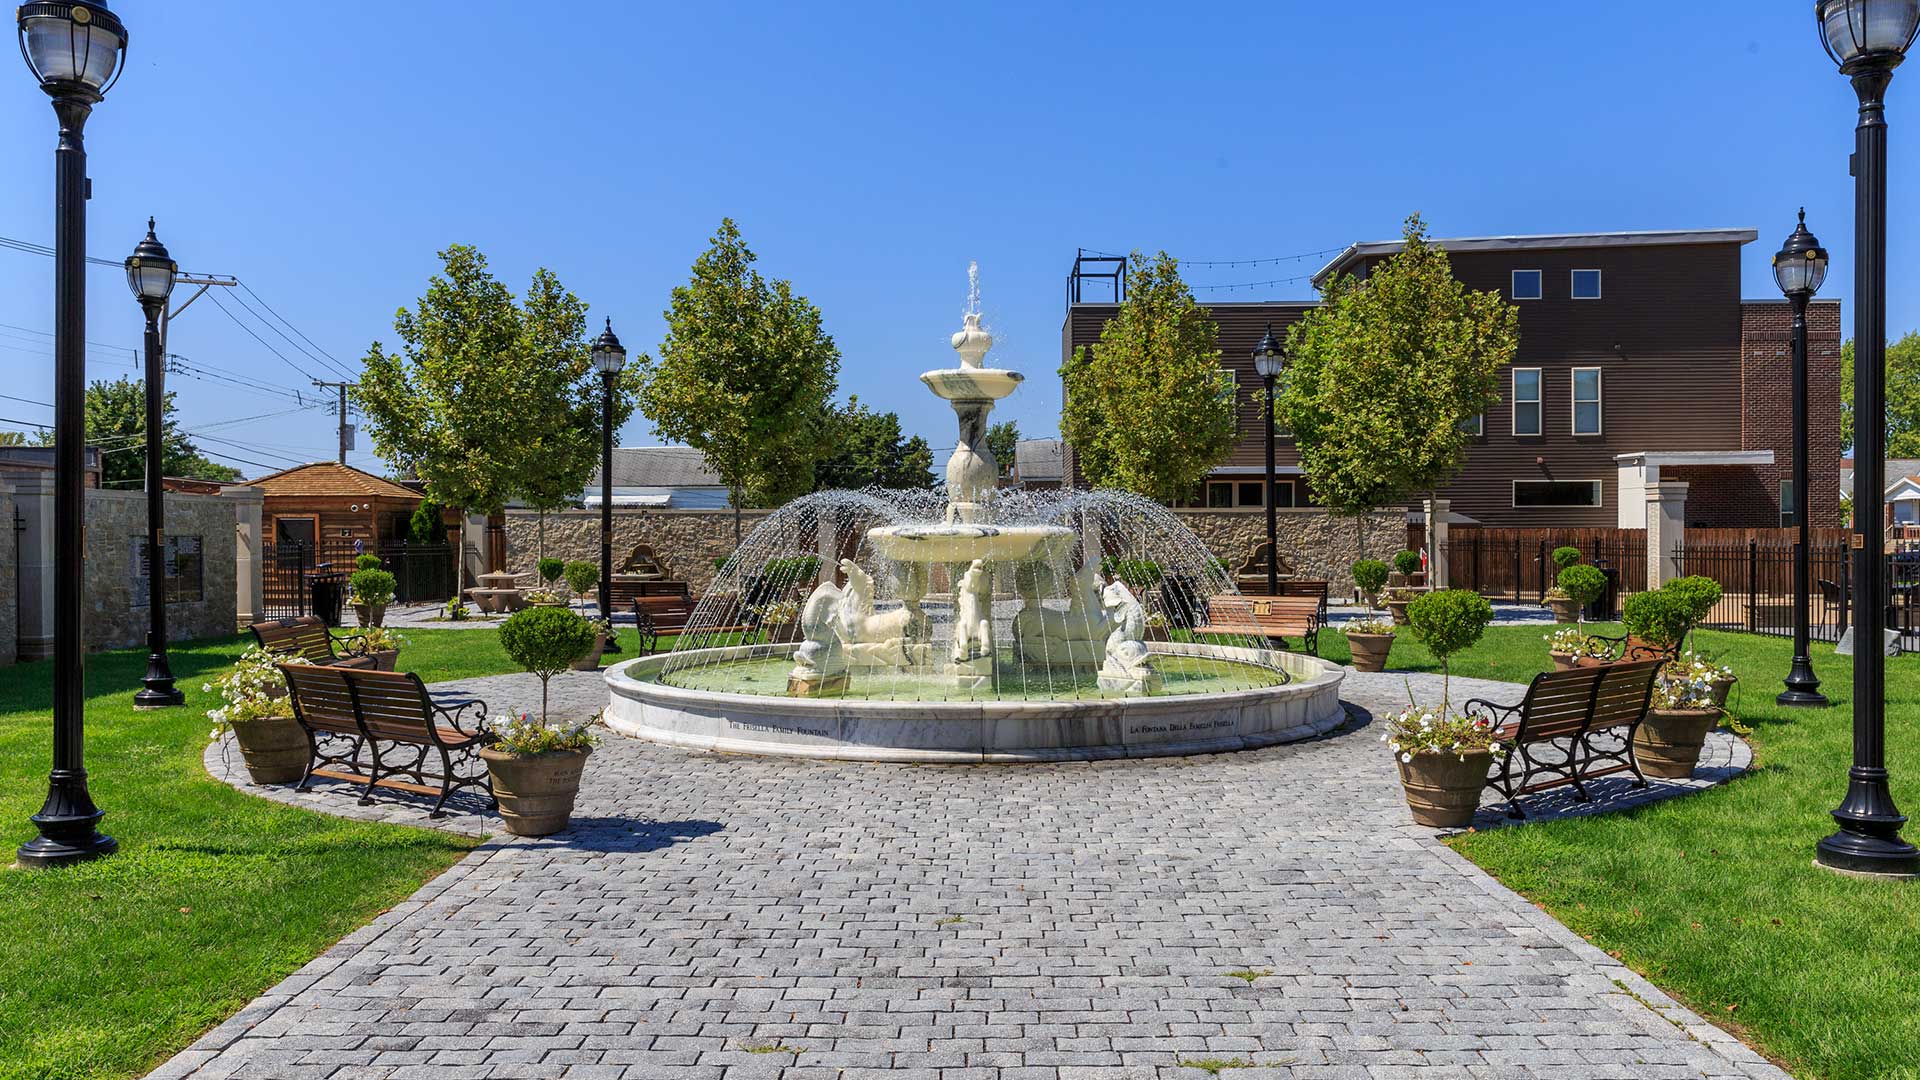 An old, statuesque fountain with water flowing in a park in The Hill district of St. Louis on a clear, sunny day.